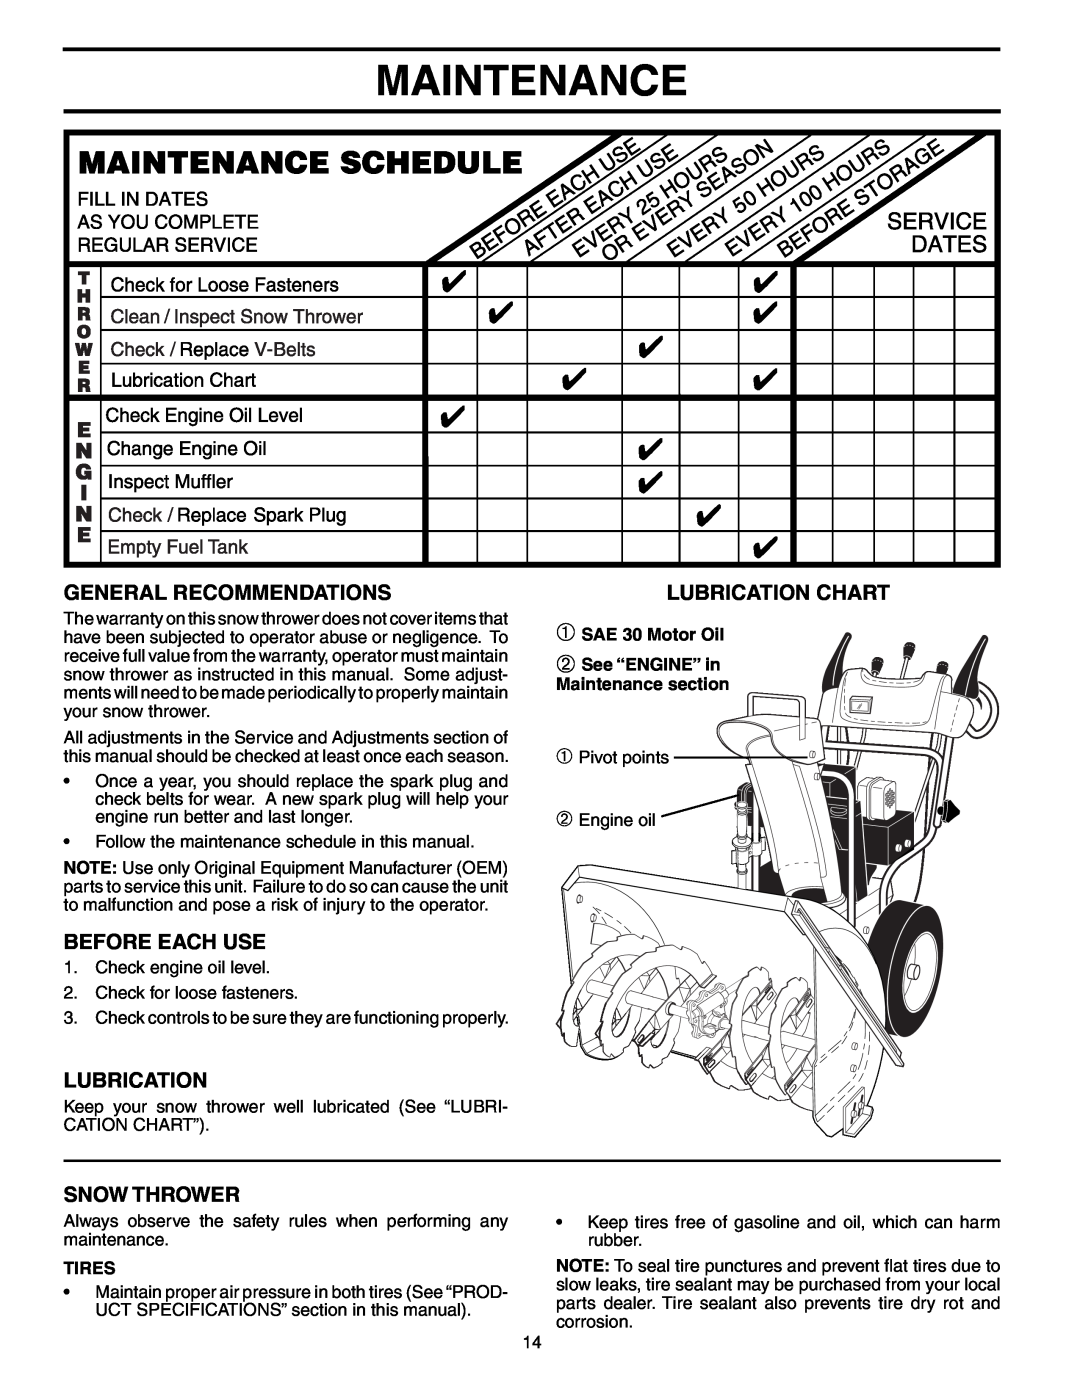 Poulan 192046 Maintenance, General Recommendations, Before Each Use, Snow Thrower, Lubrication Chart, Tires 